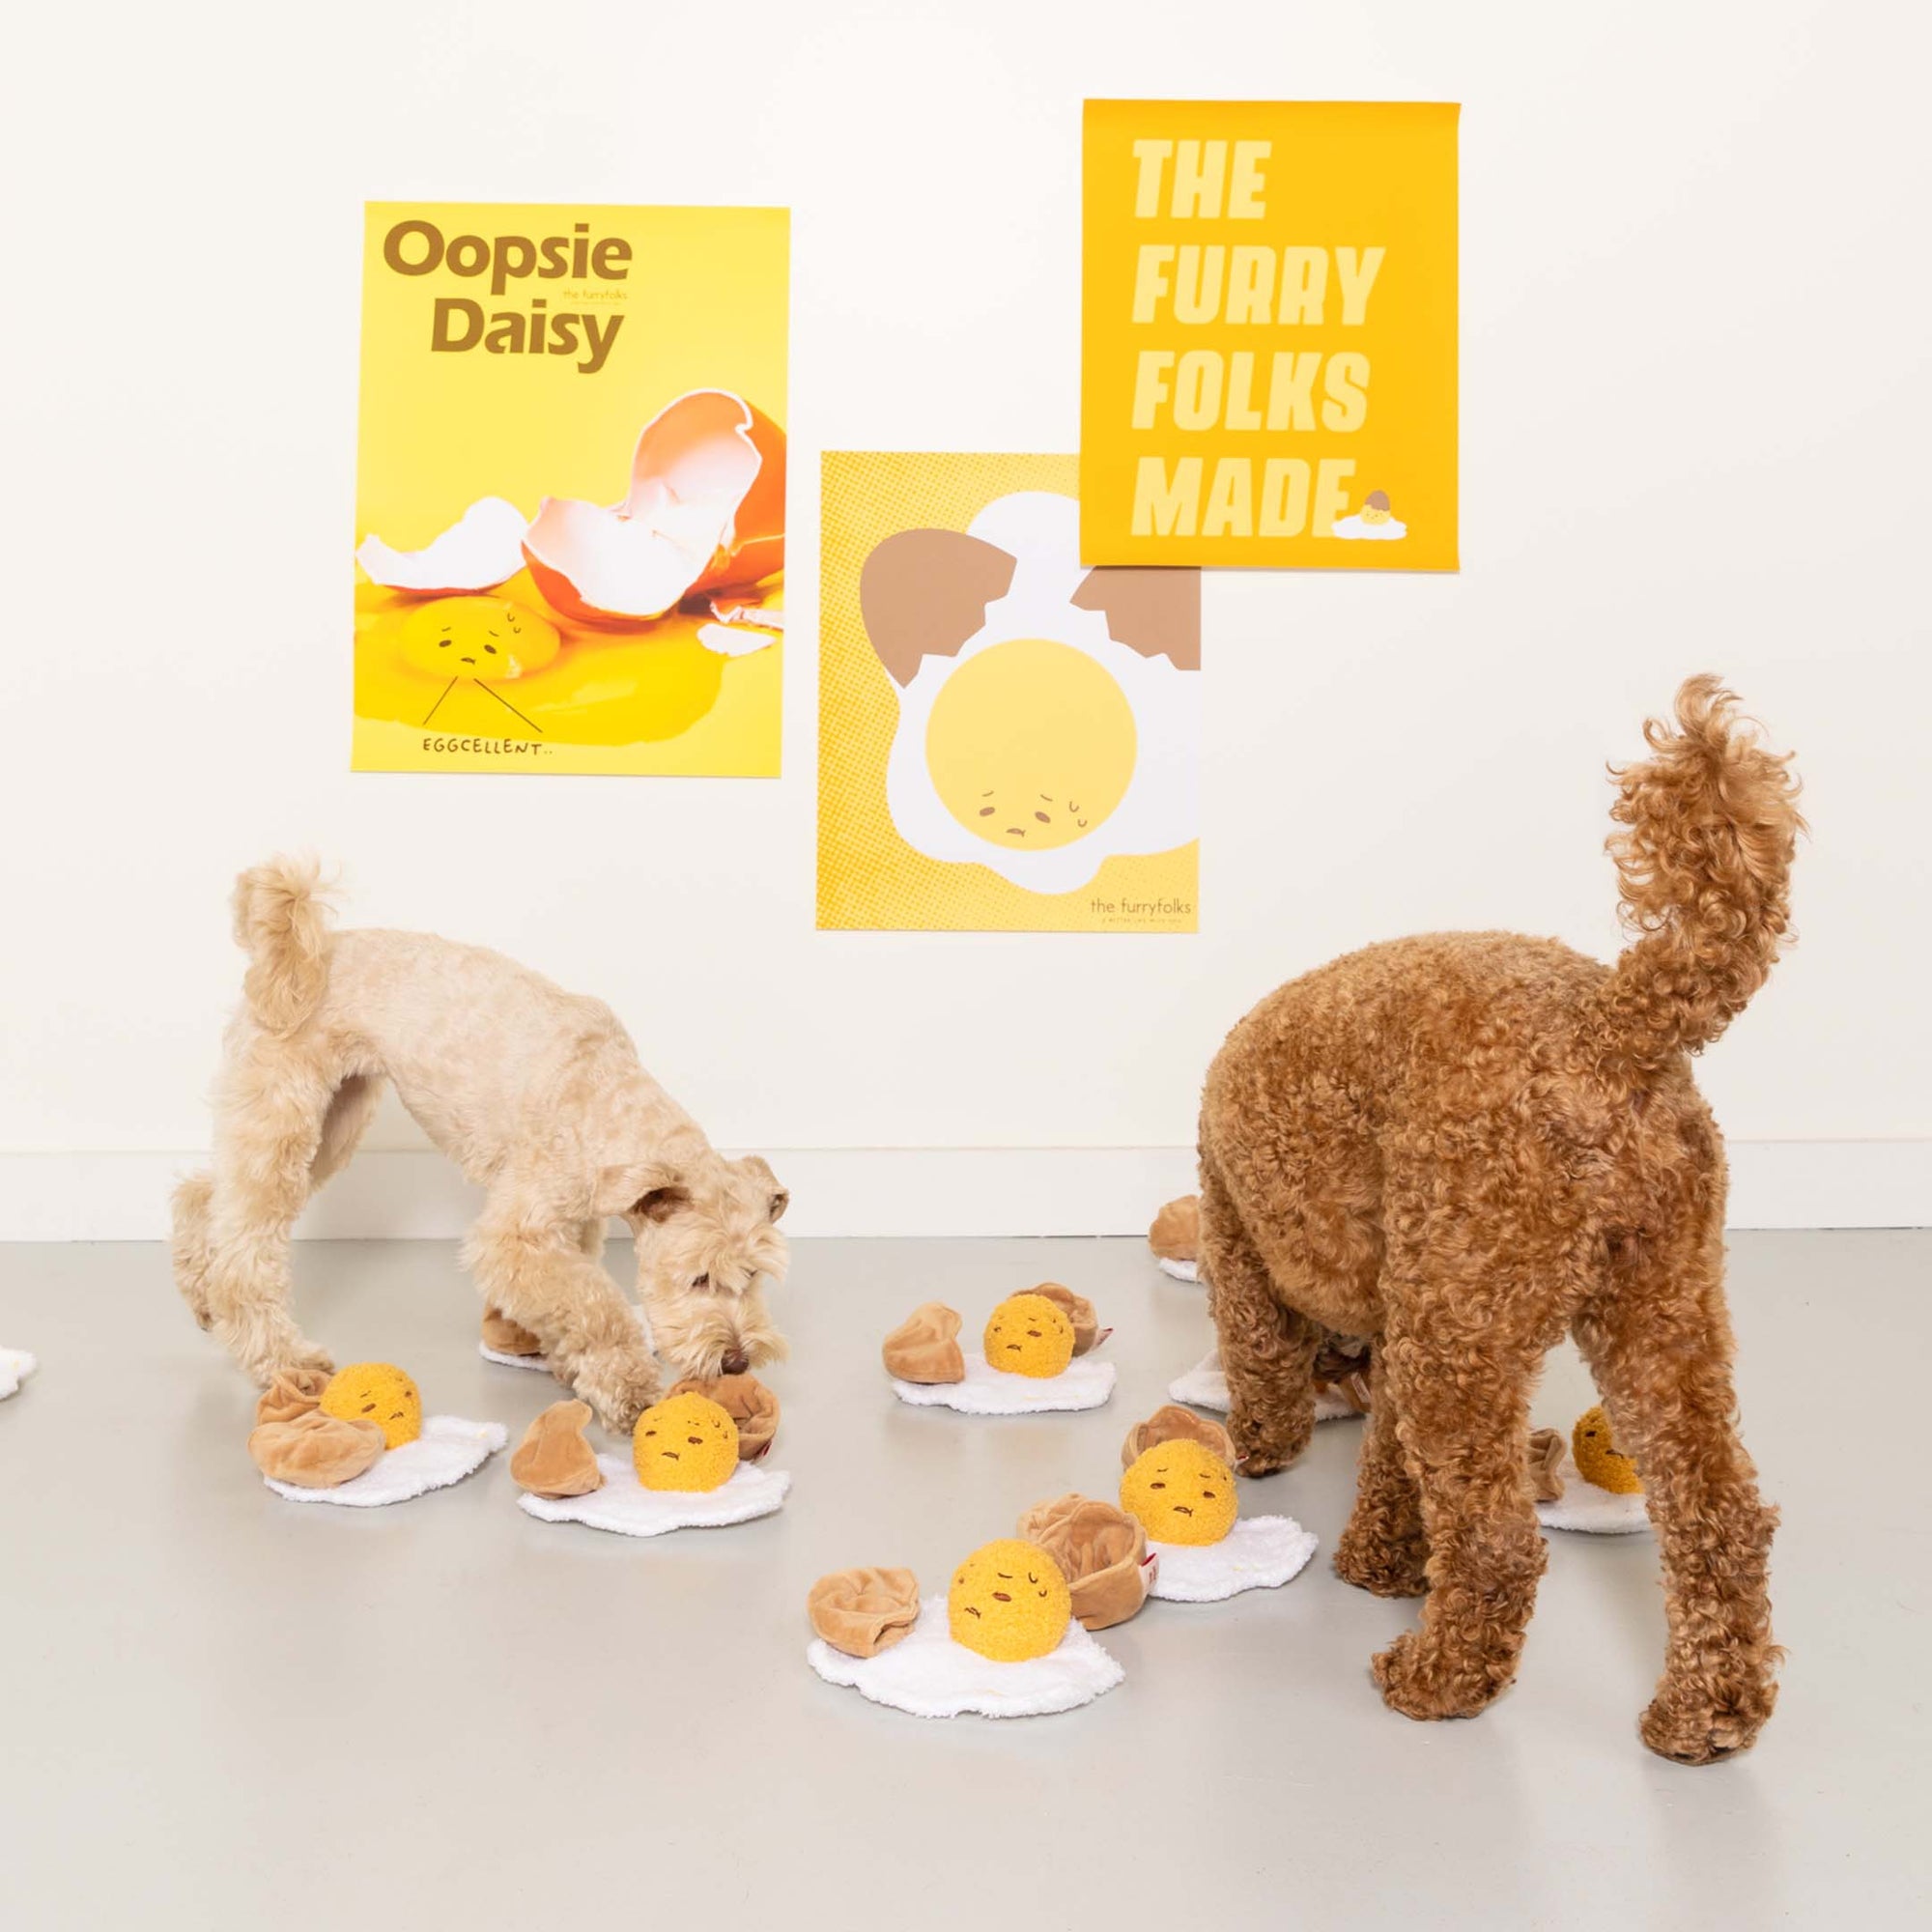 Two playful dogs engaging with 'The Furryfolks' brand interactive egg-themed dog toys on a white studio background, with bright yellow 'Oopsie Daisy' and 'The Furryfolks Made' posters adding a cheerful atmosphere to the playtime session.